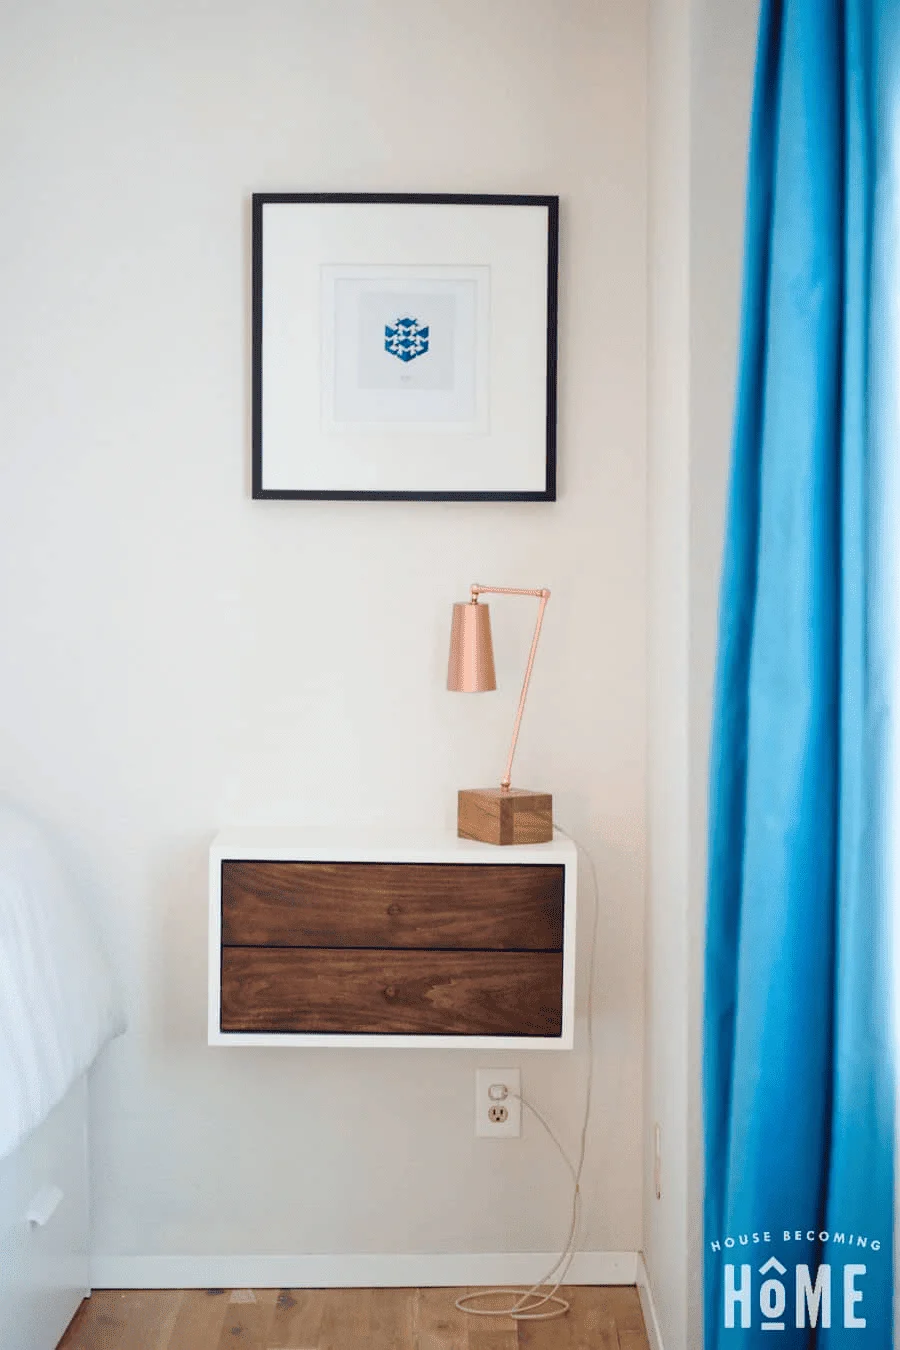 how to build a nightstand